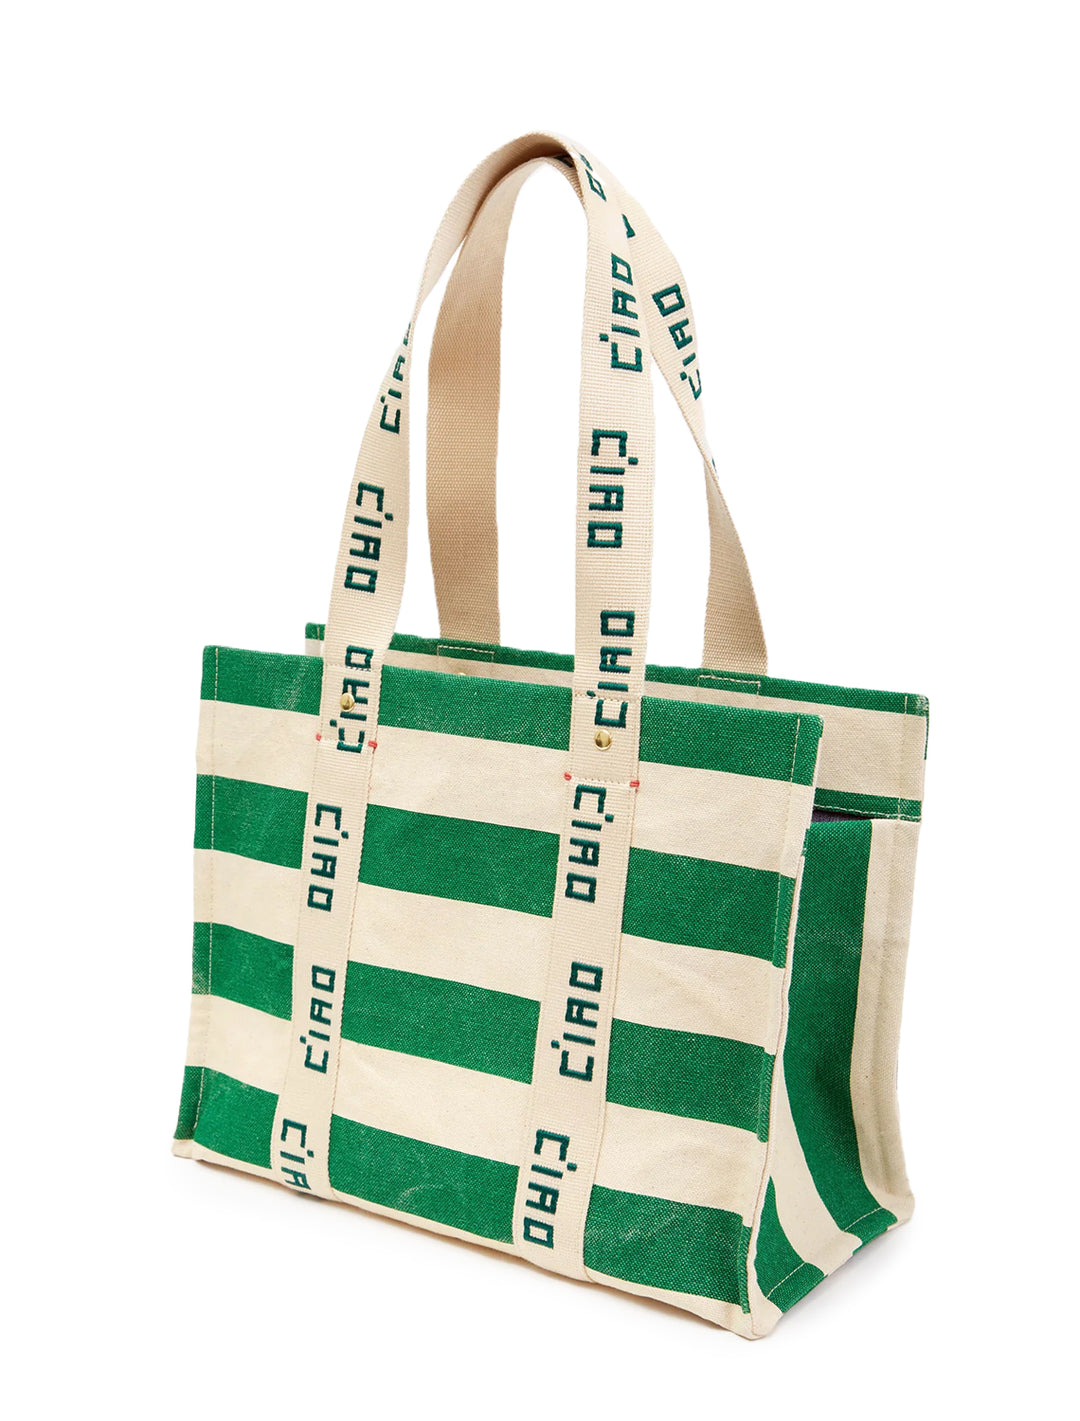 Back angle view of Clare V.'s noemie tote in palm green and natural stripe.